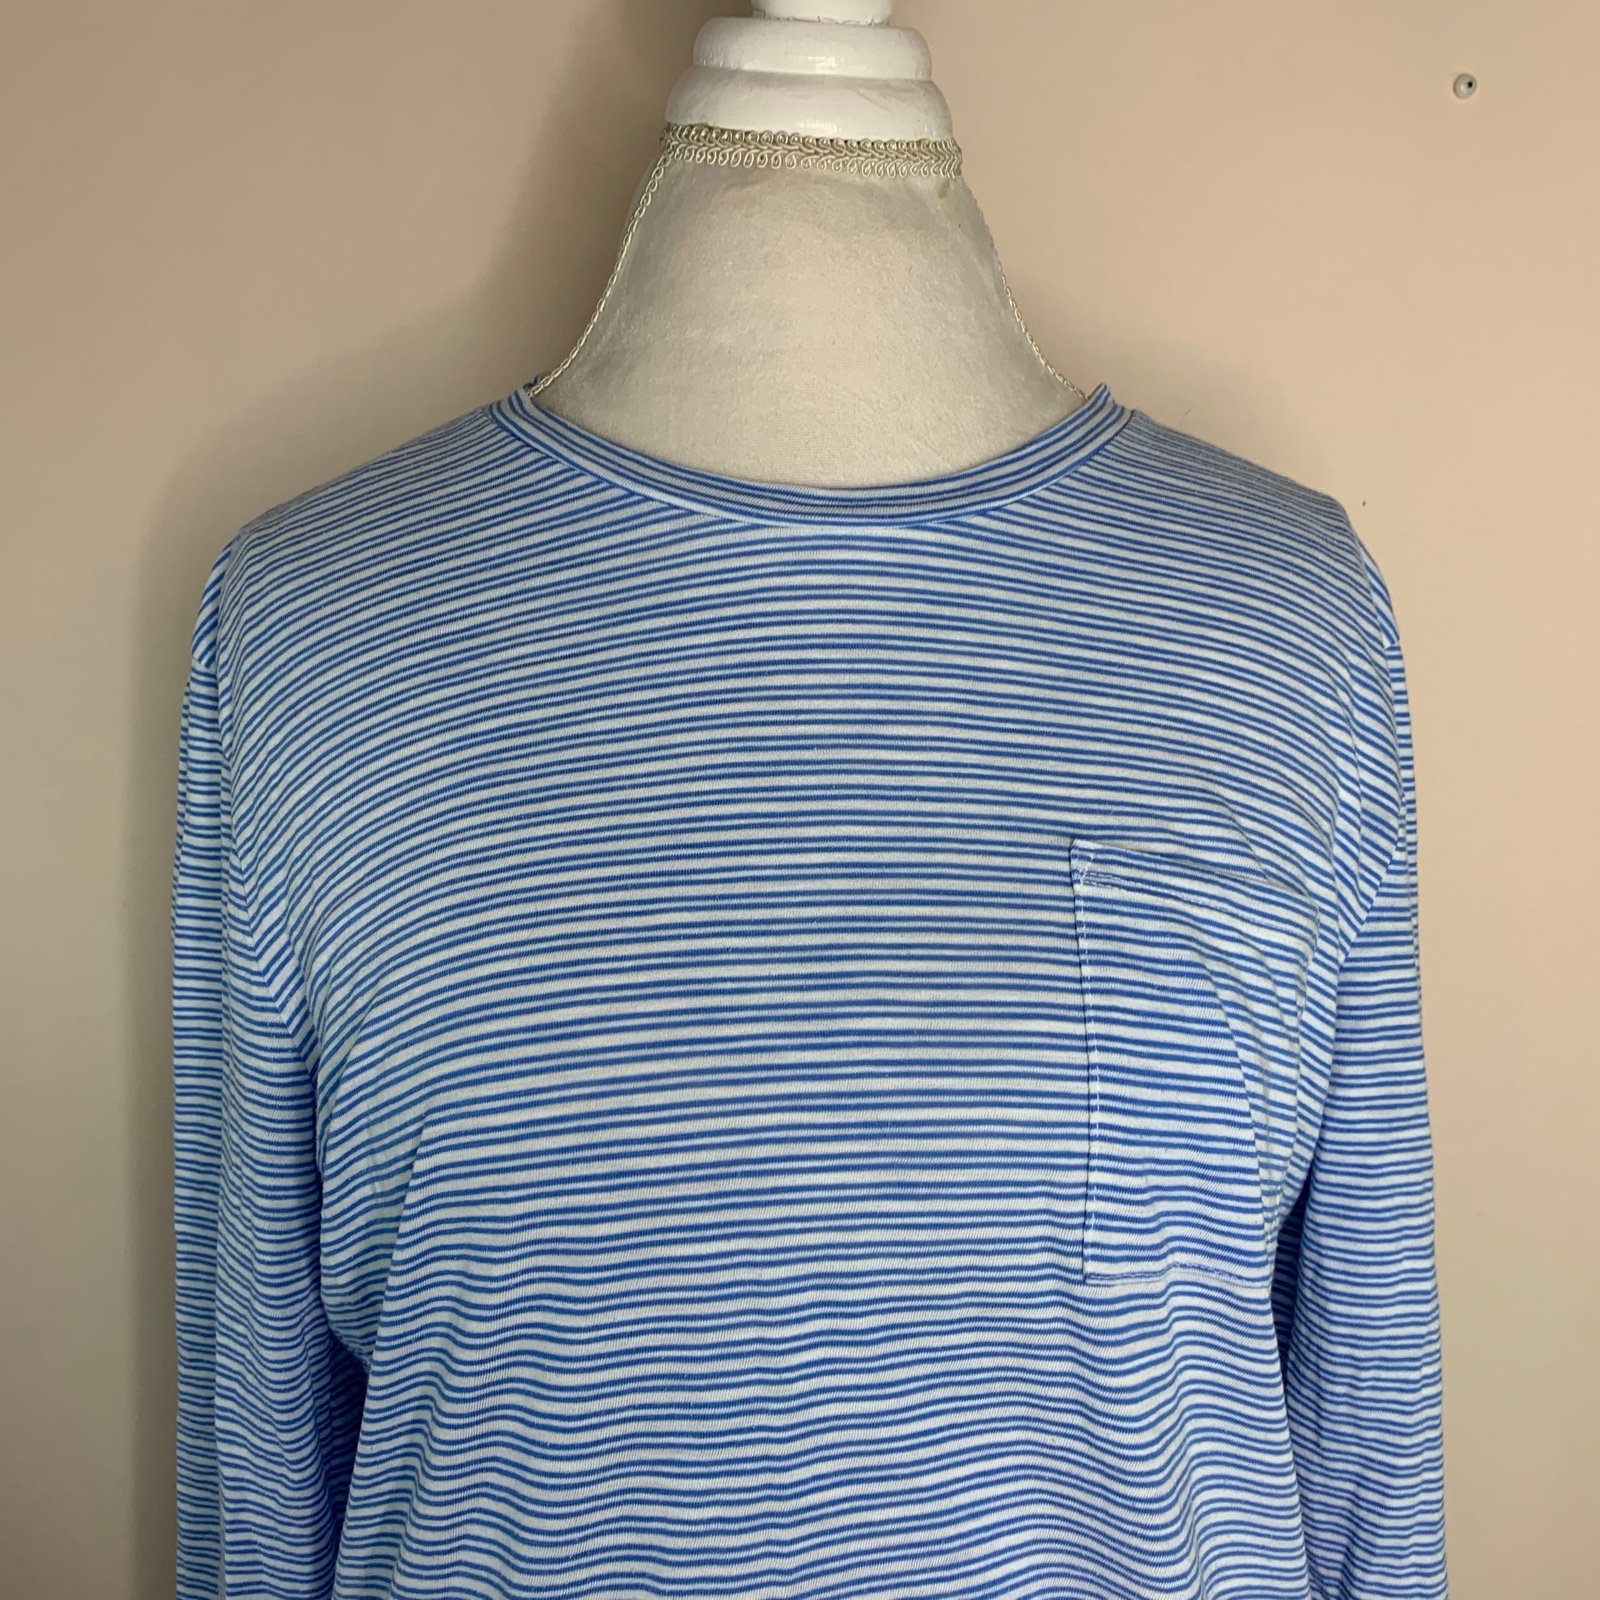 cheapest place to buy  Patagonia Organic Cotton Stripe Striped Long Sleeve Shirt Womens Size Large Oq9LWmr7L High Quaity